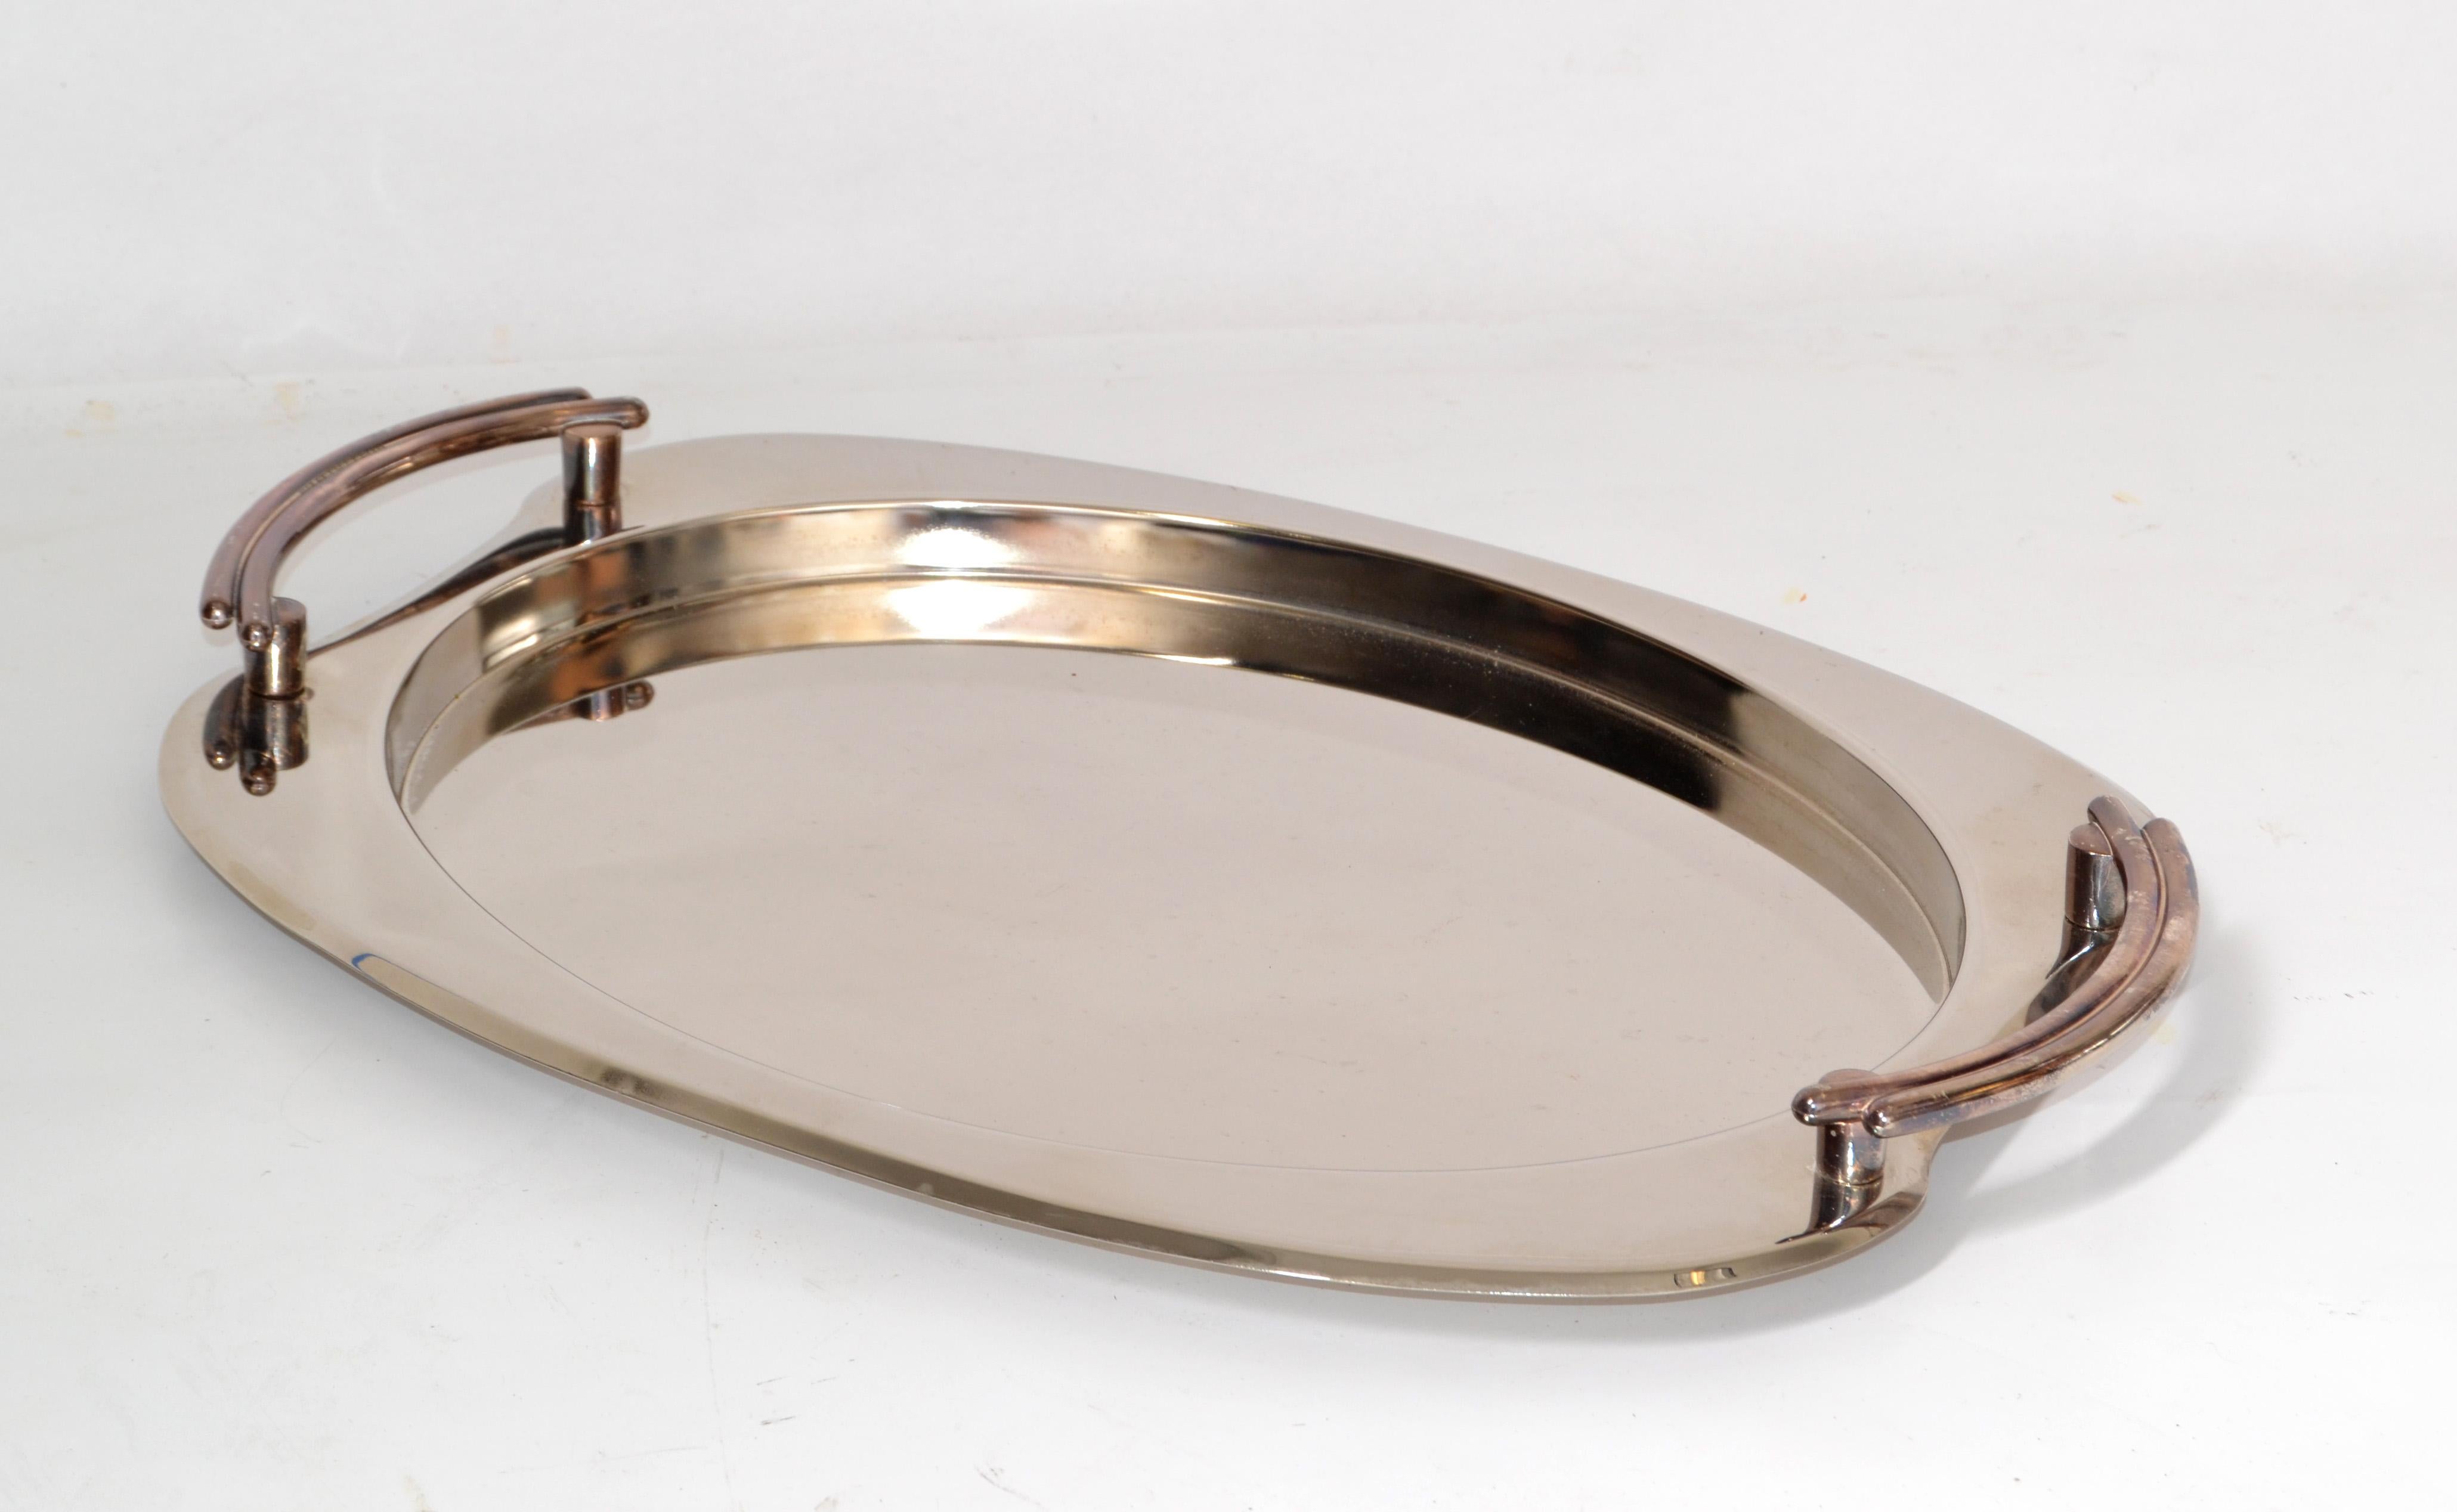 Italian Art Deco Polished Steel Platter, Serveware, Barware or Tray with Silver Handles.
Great also for Your Vanity to display the perfume bottles. 
In very good condition with some Tarnish to the Silver.
Just recently professionally polished. 